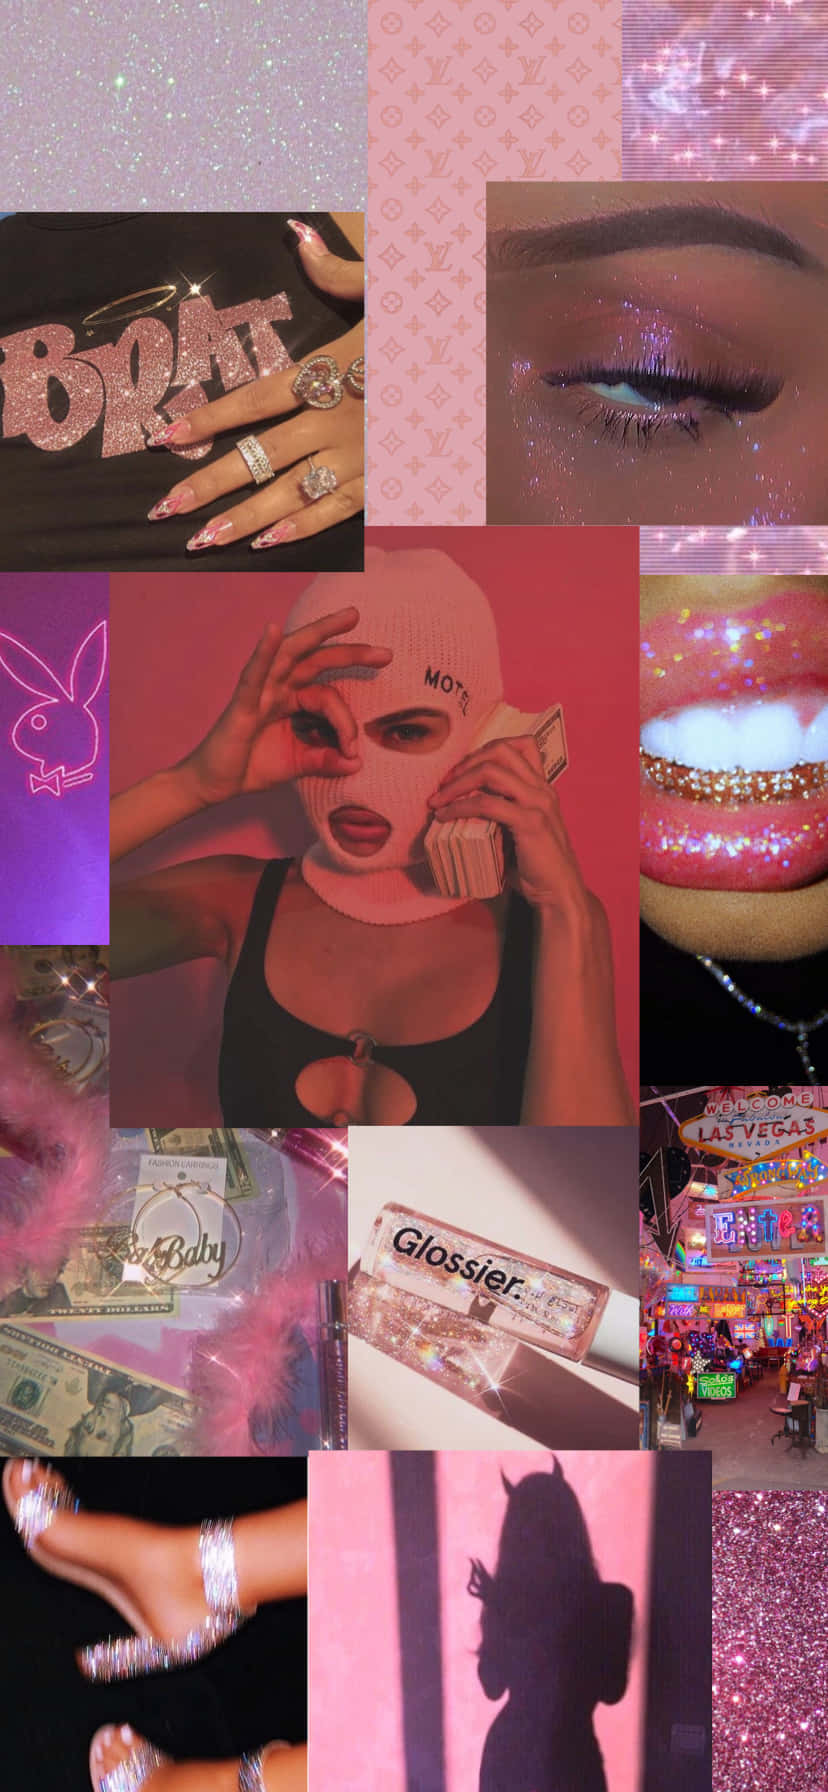 A Collage Of Pictures Of People With Pink Makeup Wallpaper